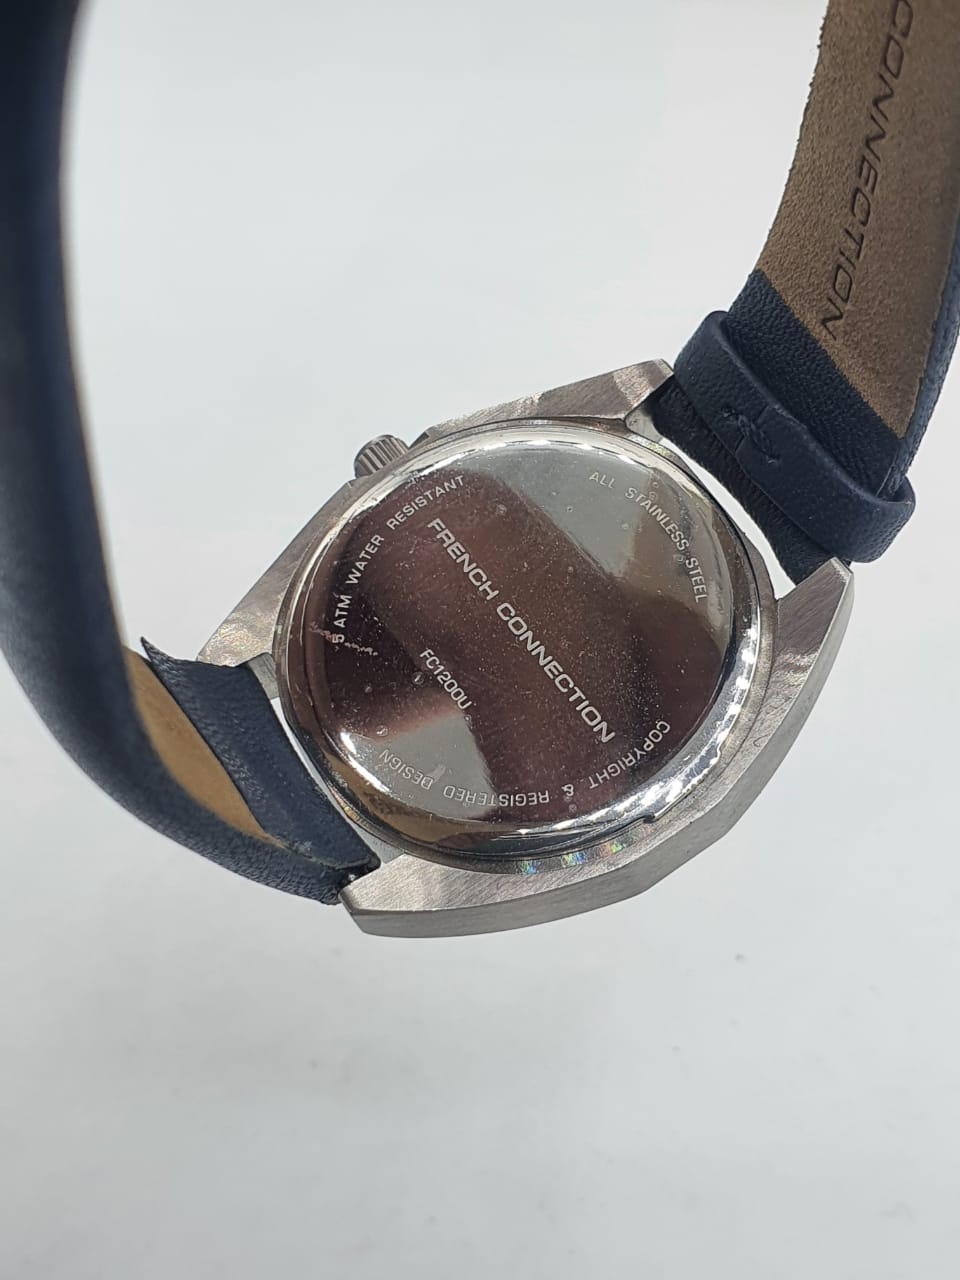 French Connecion ladies watch